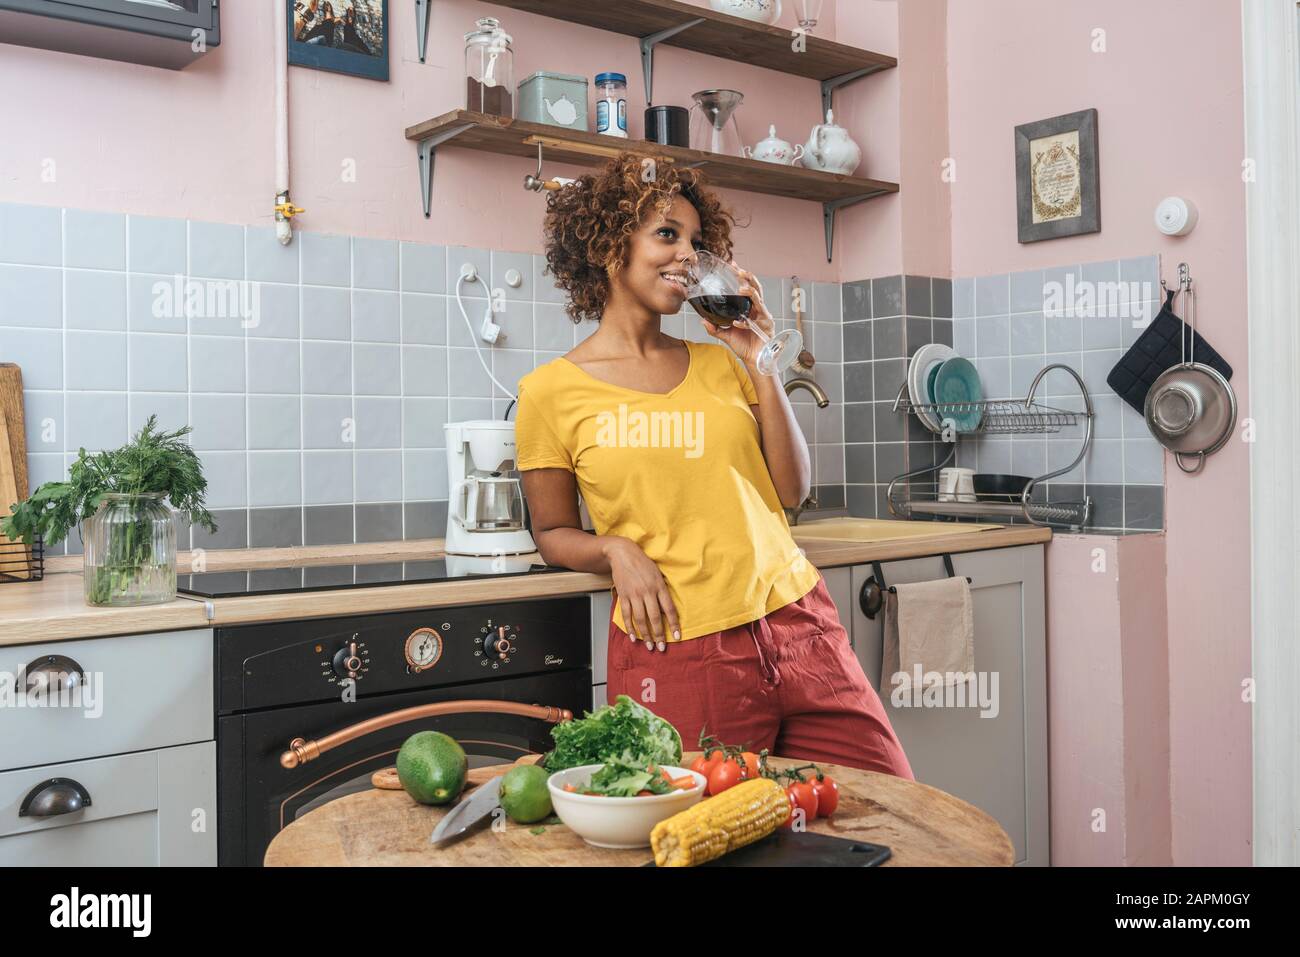 Smiling young woman drinking glass of red wine in kitchen Stock Photo